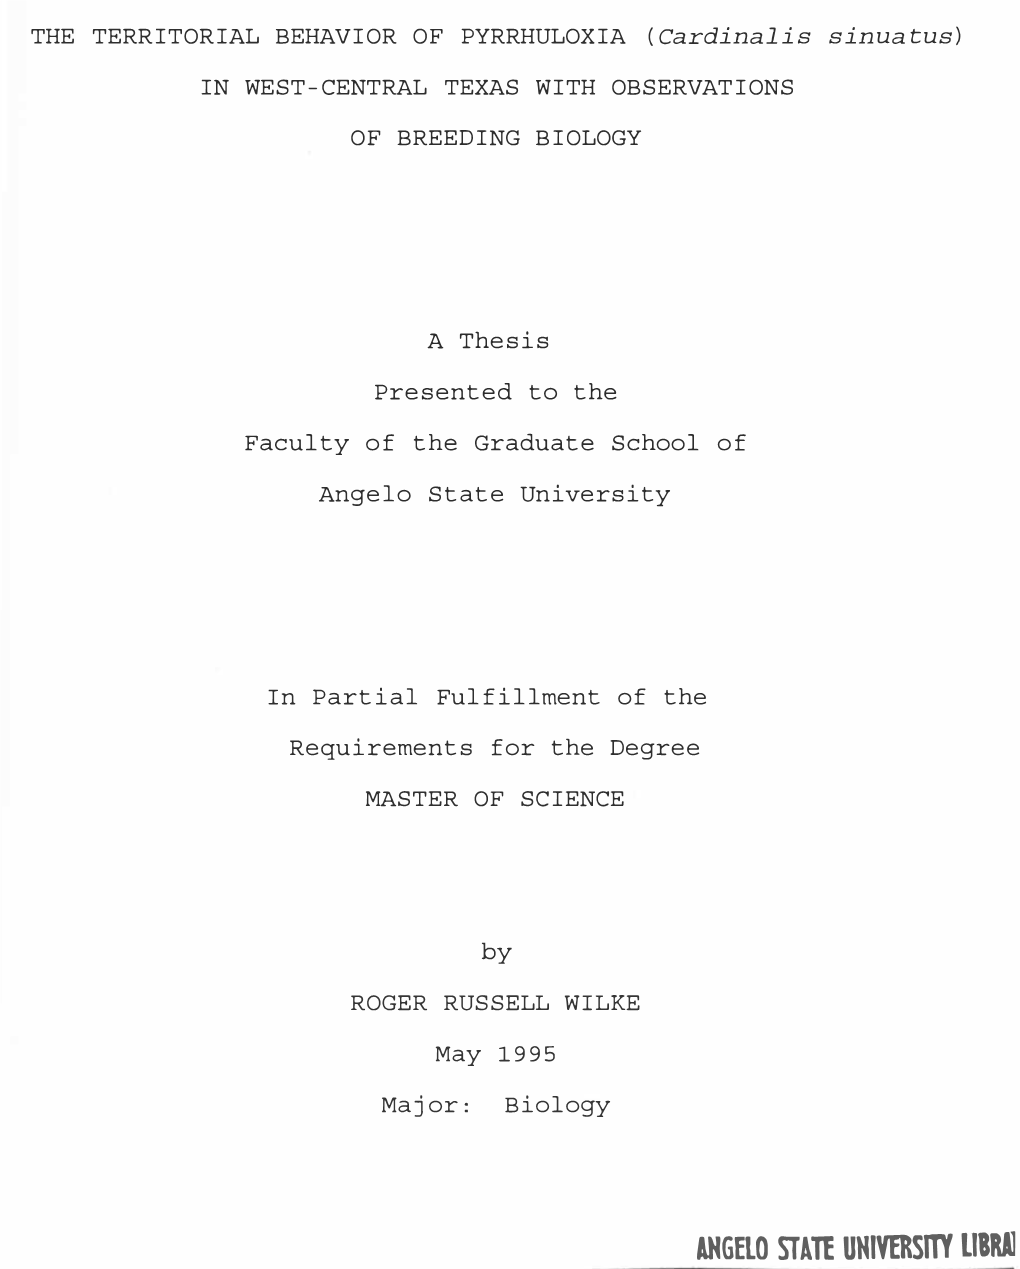 Thesis (2.609Mb)